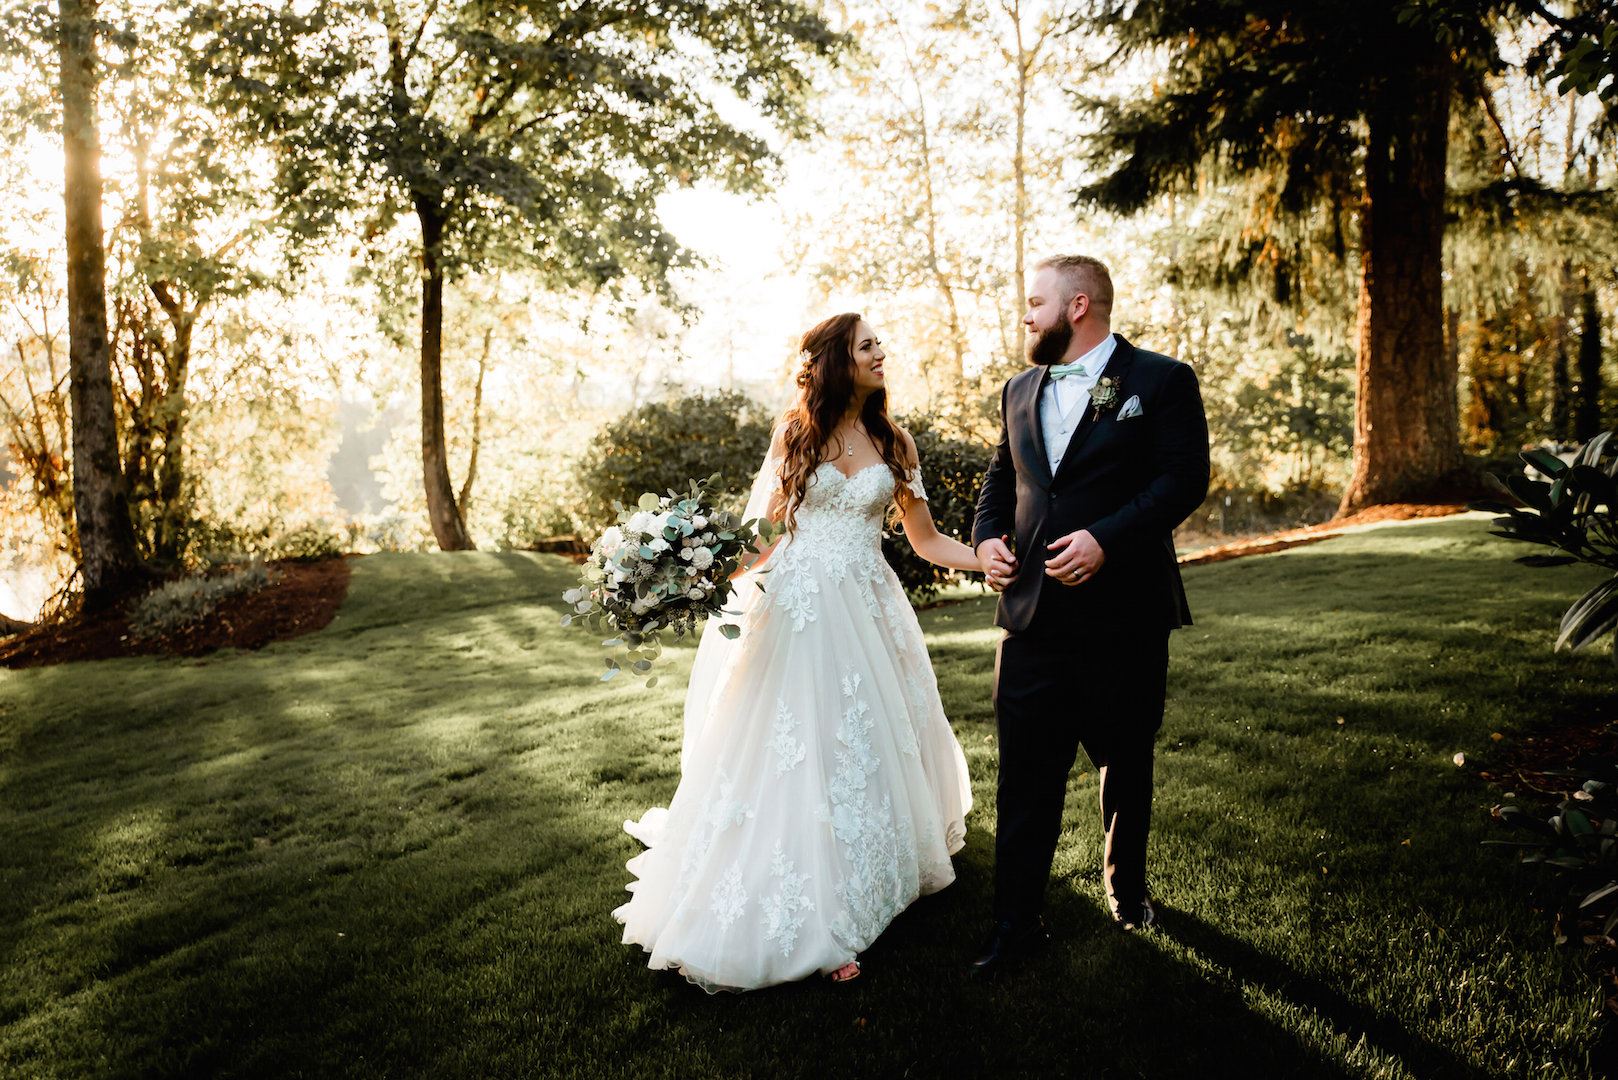 bride in Justin Alexander ball gown from Charlotte's Weddings in Portland, Oregon and walking holding hands with groom